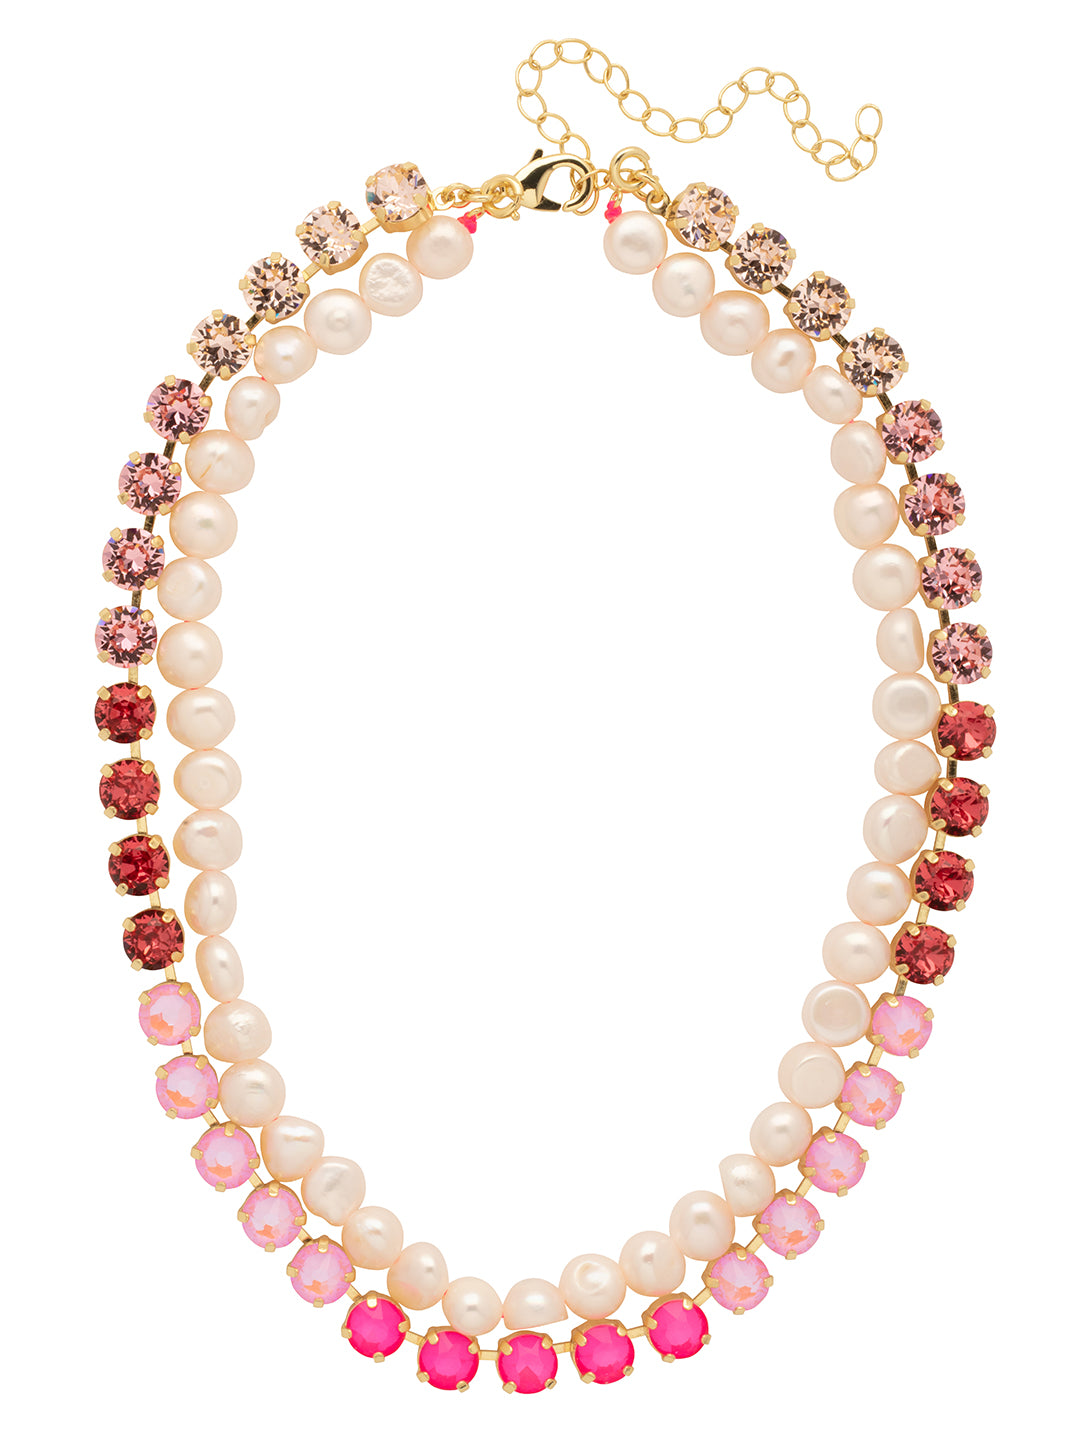 Matilda Layered Tennis Necklace - 4NFL18BGBFL - <p>The Matilda LayeredTennis Necklaces features a tennis necklace with lined with round cut crystals on an adjustable chain, secured with a lobster claw clasp, and a strand of freshwater pearls with a spring ring clasp on either end. Remove the strand of peals and wear the crystal tennis necklace solo or easily clip on the strand of pearls for an effortless layered look! From Sorrelli's Big Flirt collection in our Bright Gold-tone finish.</p>